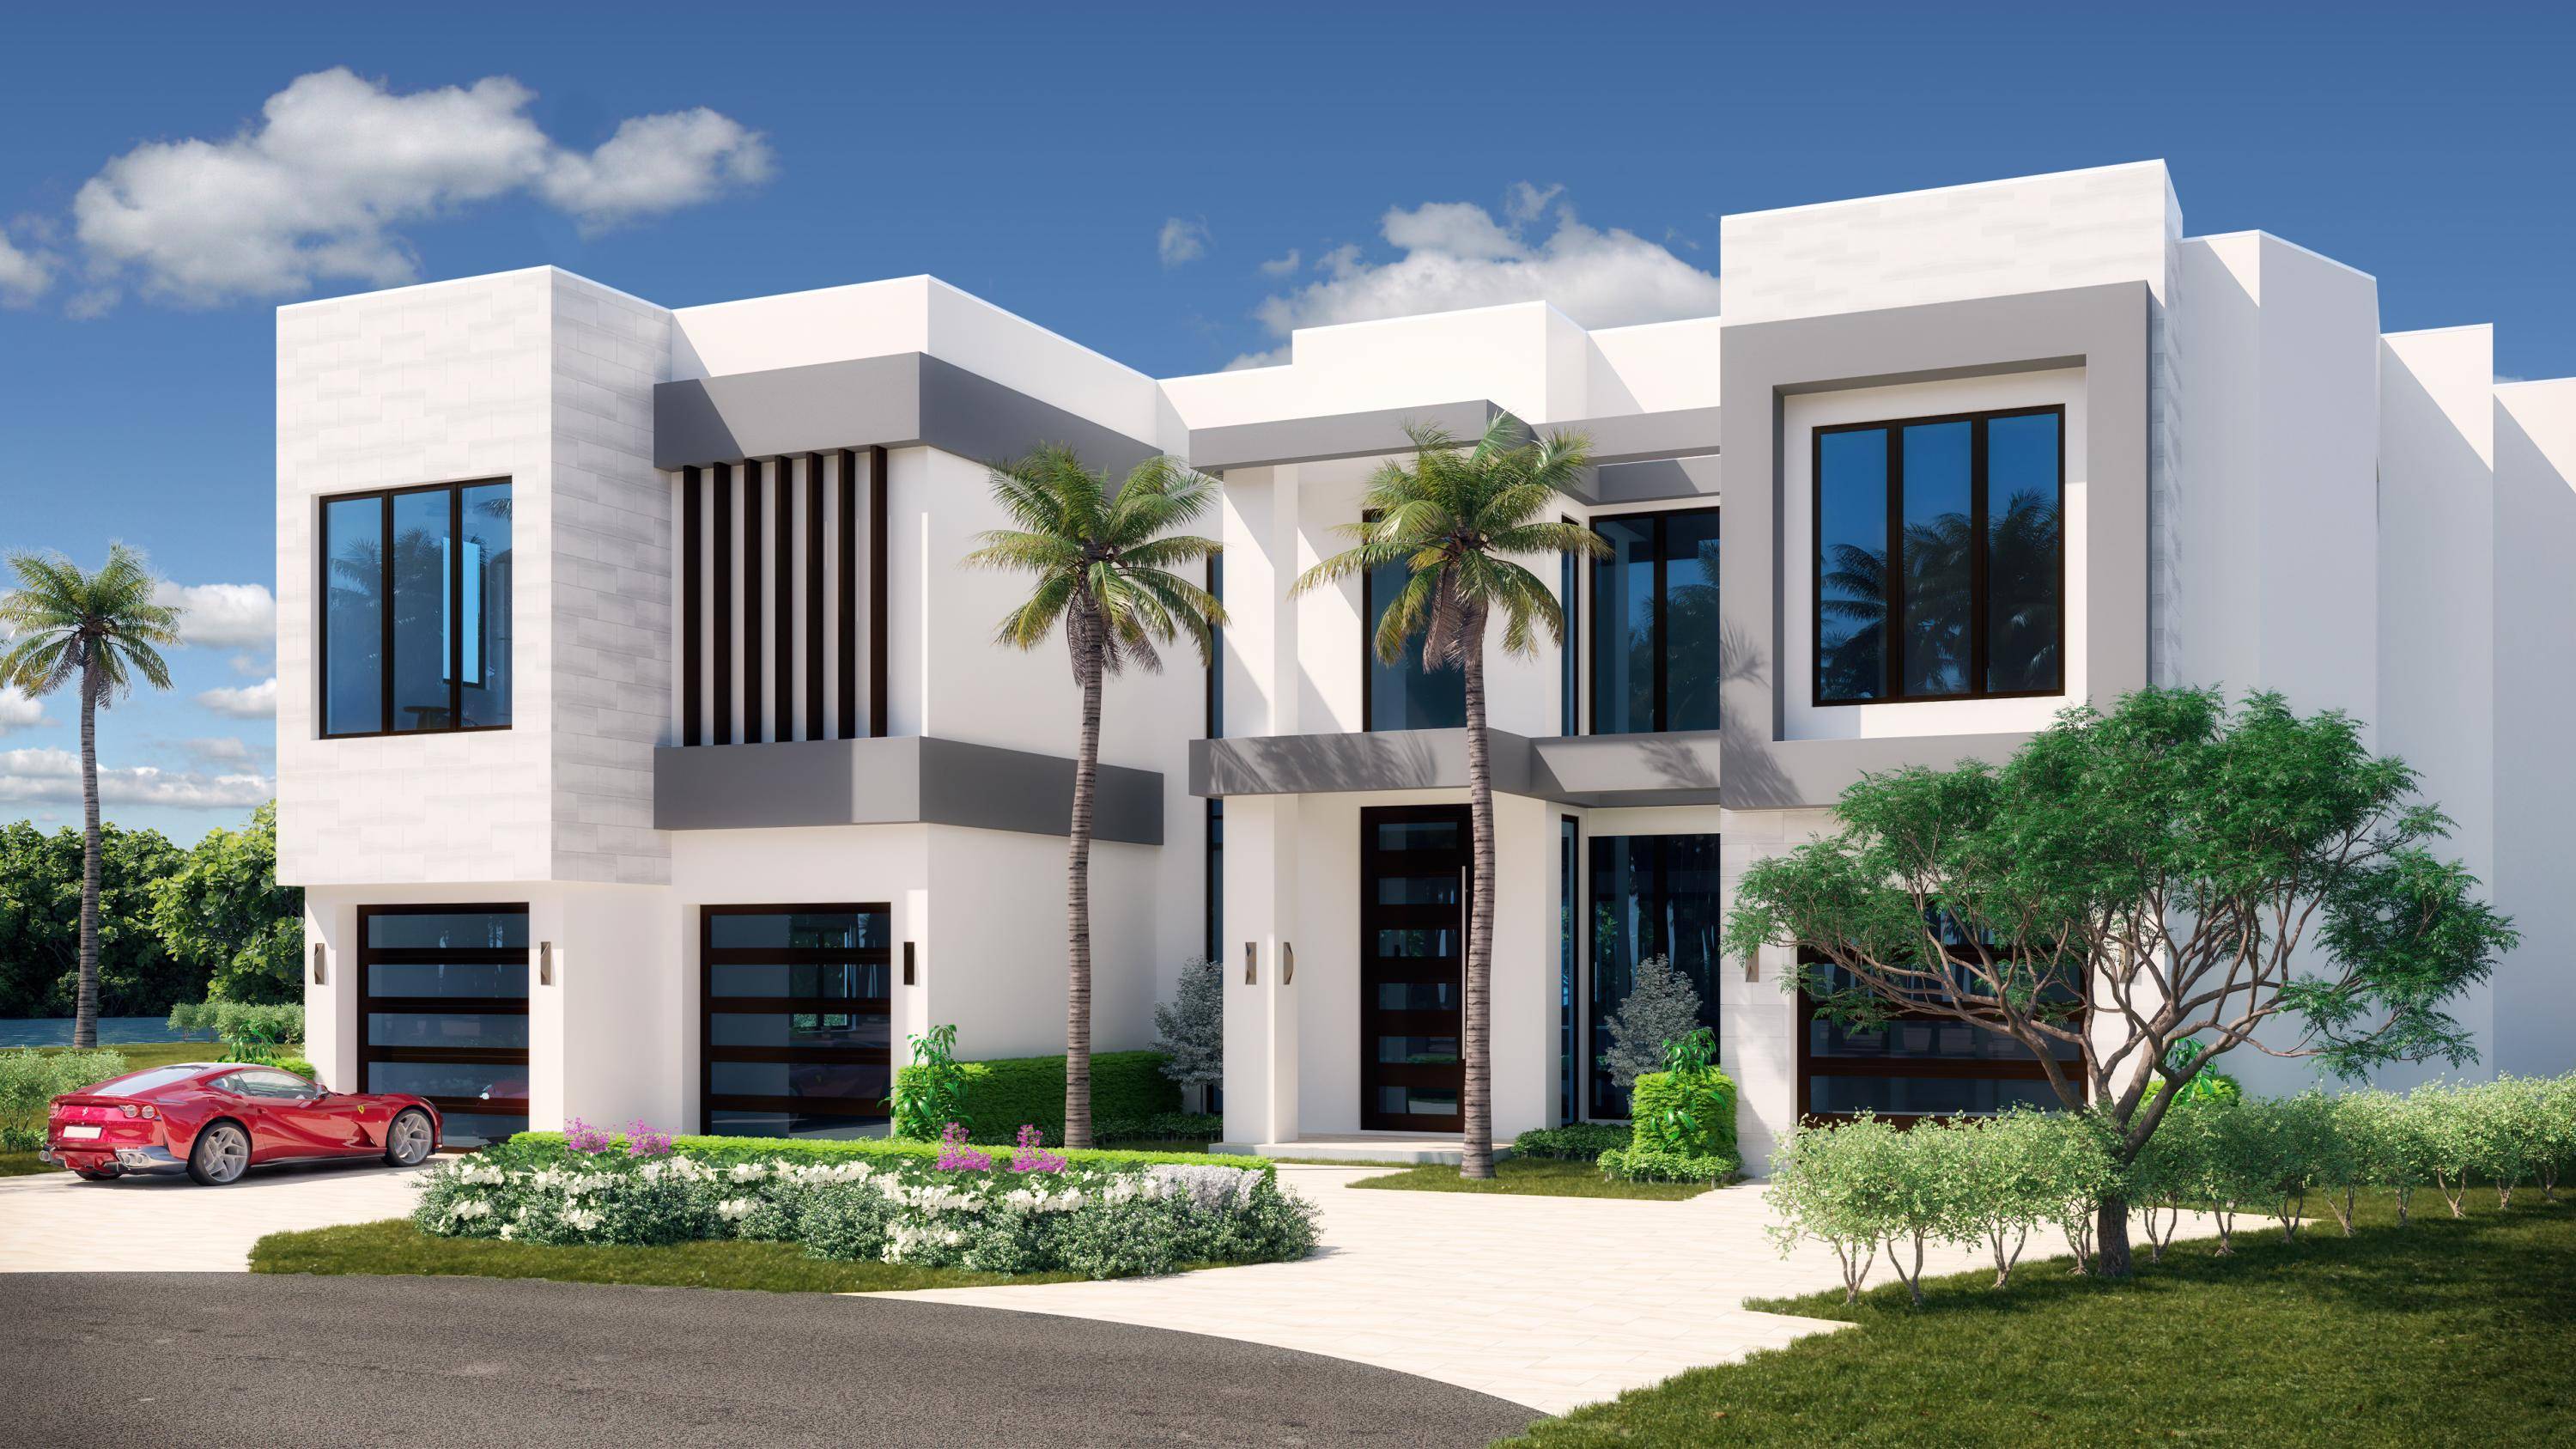 Seize this rare opportunity to secure the only new construction waterfront estate coming on line this year in the quintessential Boca Raton seaside enclave, Sun Surf.